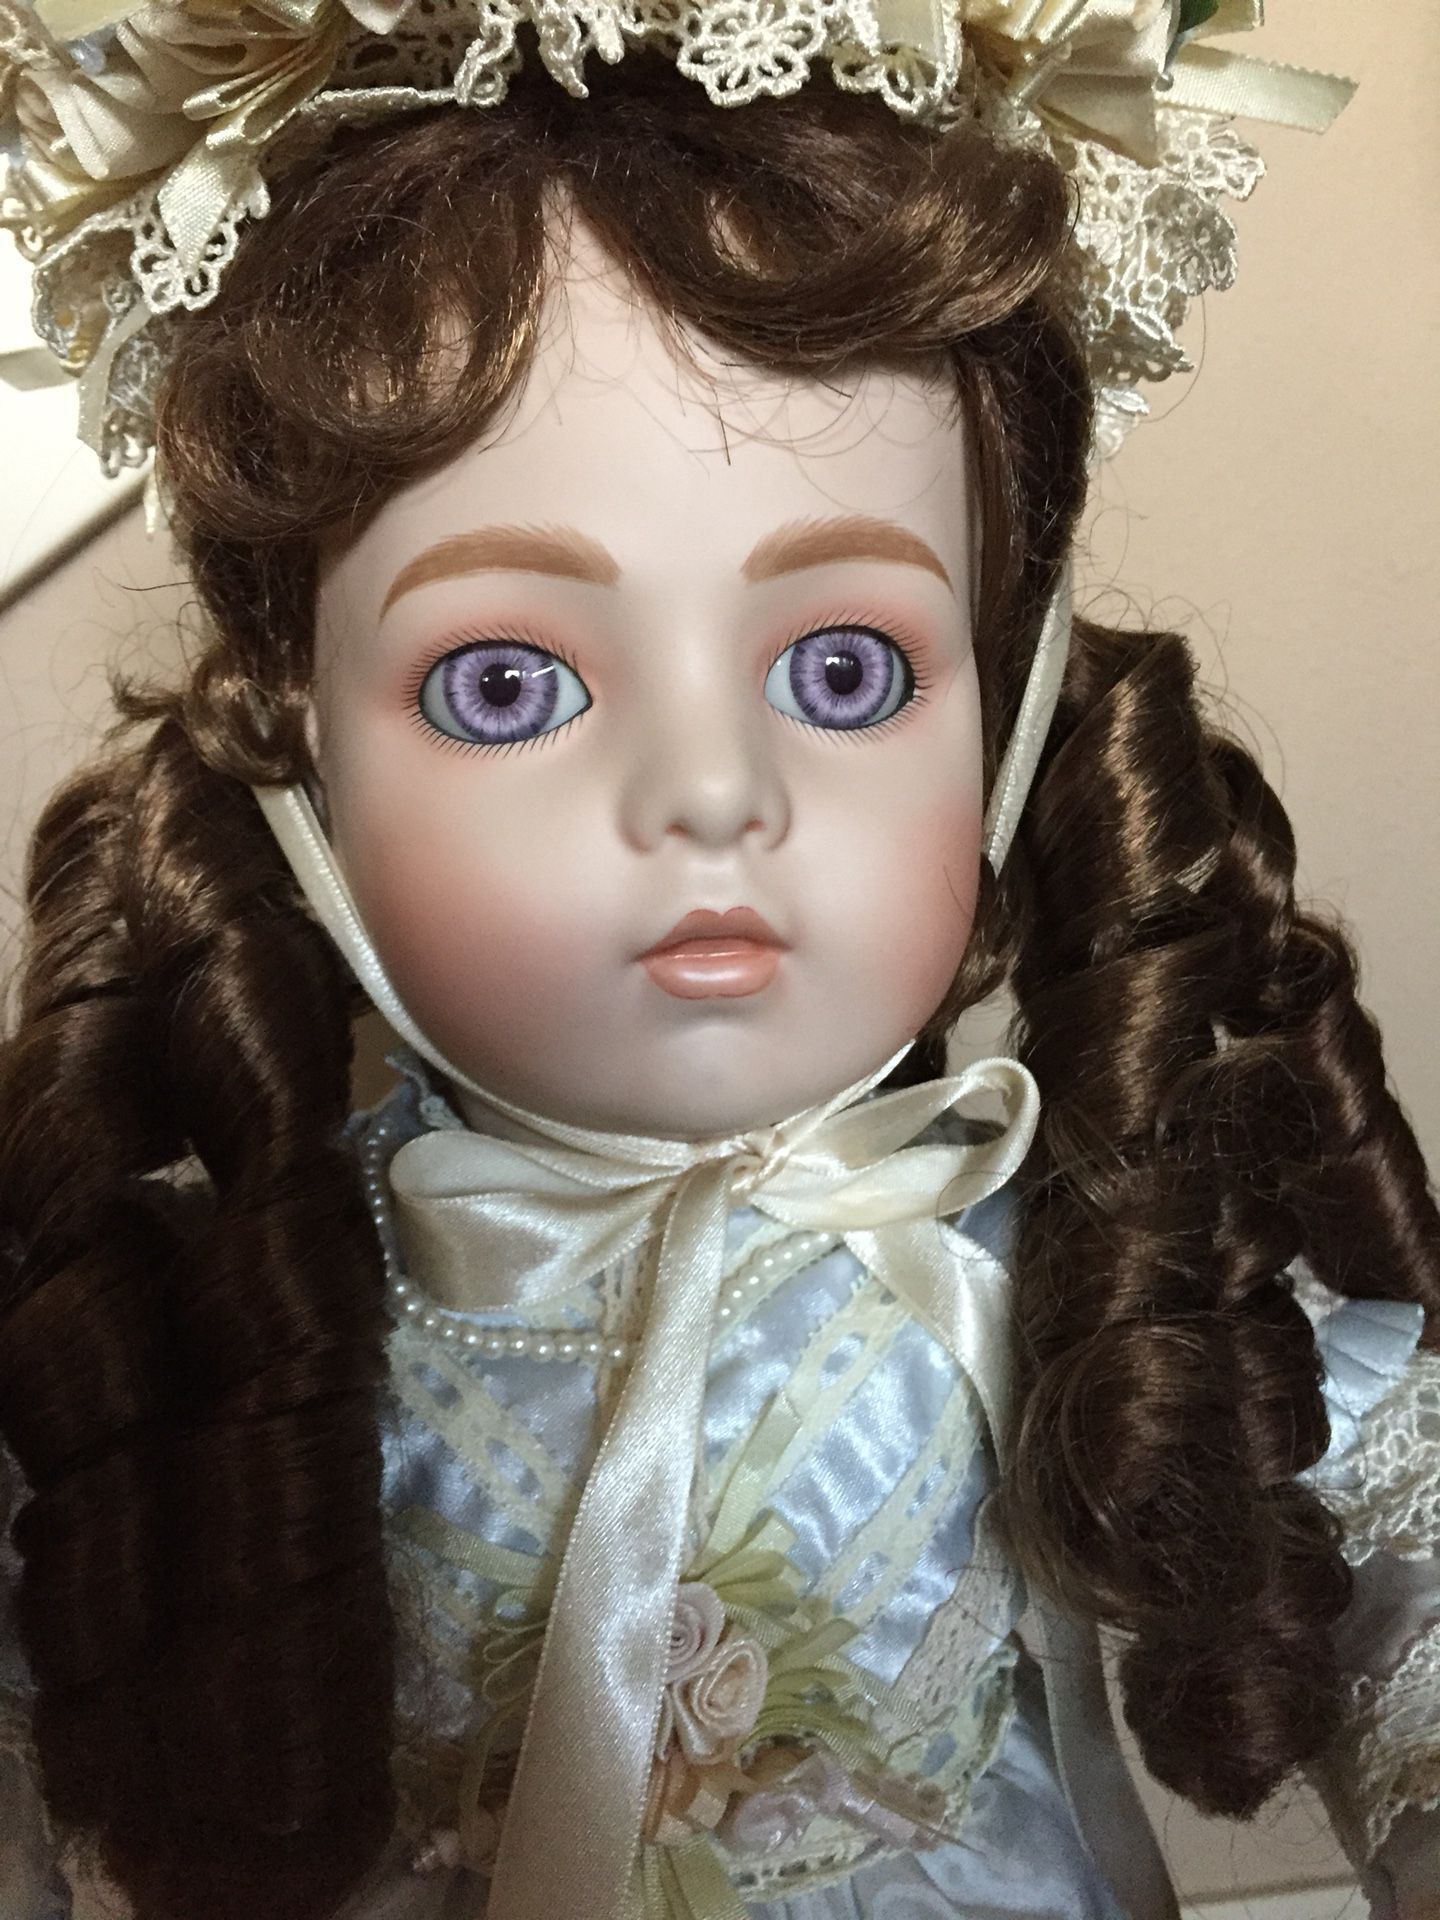 Marie Osmond Porcelain BRU Doll - 24”H Limited Edition Reproduction - (purchased for $251, SACRIFICING at $85)